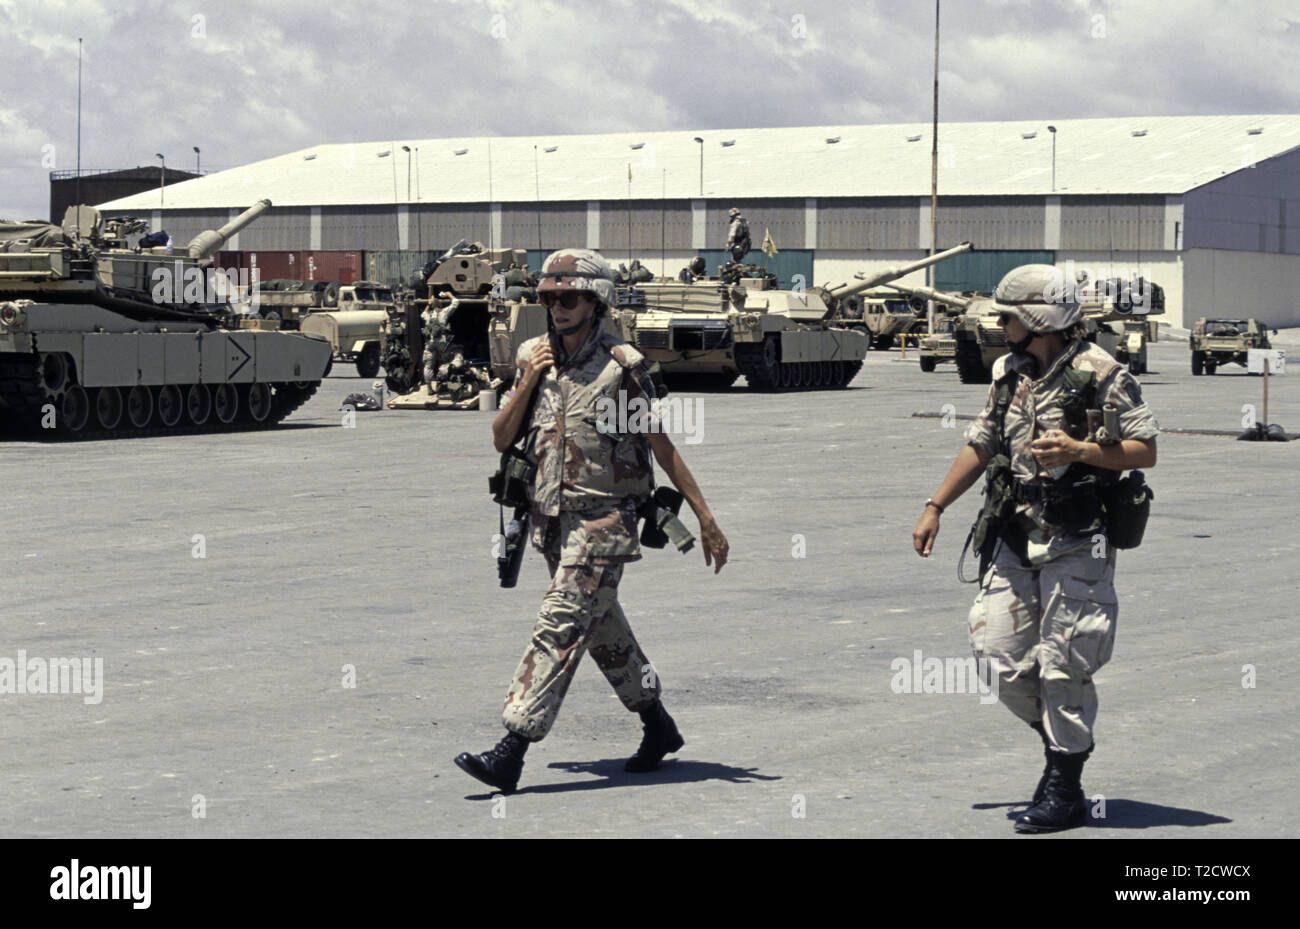 30th October 1993 Female U.S. Army soldiers of the 10th Mountain Division in the new port in Mogadishu, Somalia. M1A1 Abrams tanks of the 24th Infantry Division, 1st Battalion of the 64th Armored Regiment and a United Defense M981 FISTV (Fire Support Team Vehicle) are in the background, having just arrived that morning. Stock Photo